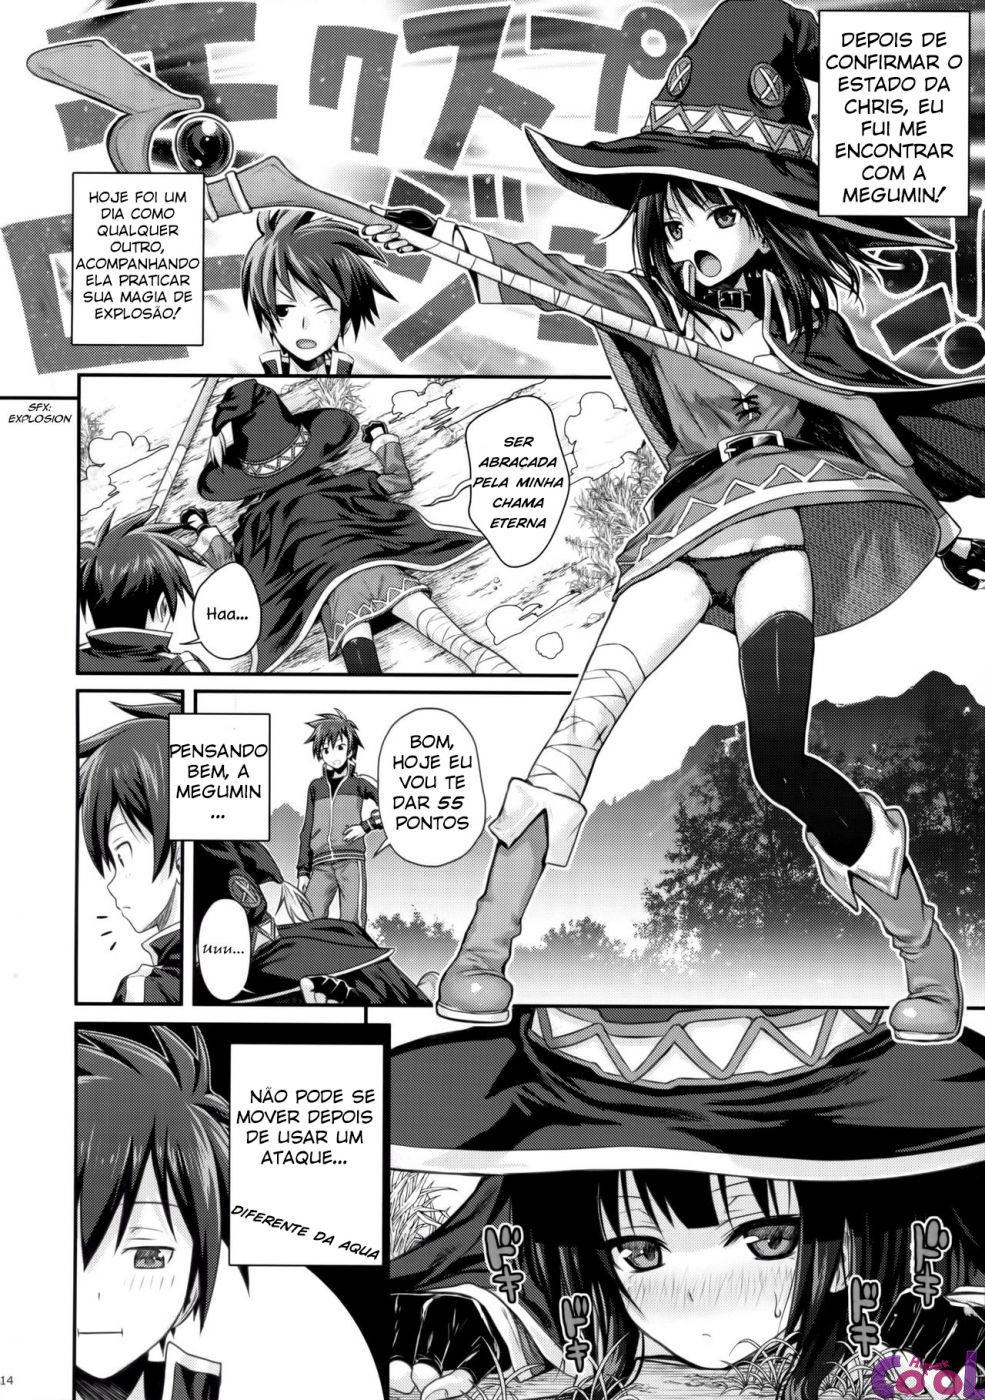 choygedo-chapter-01-page-14.jpg